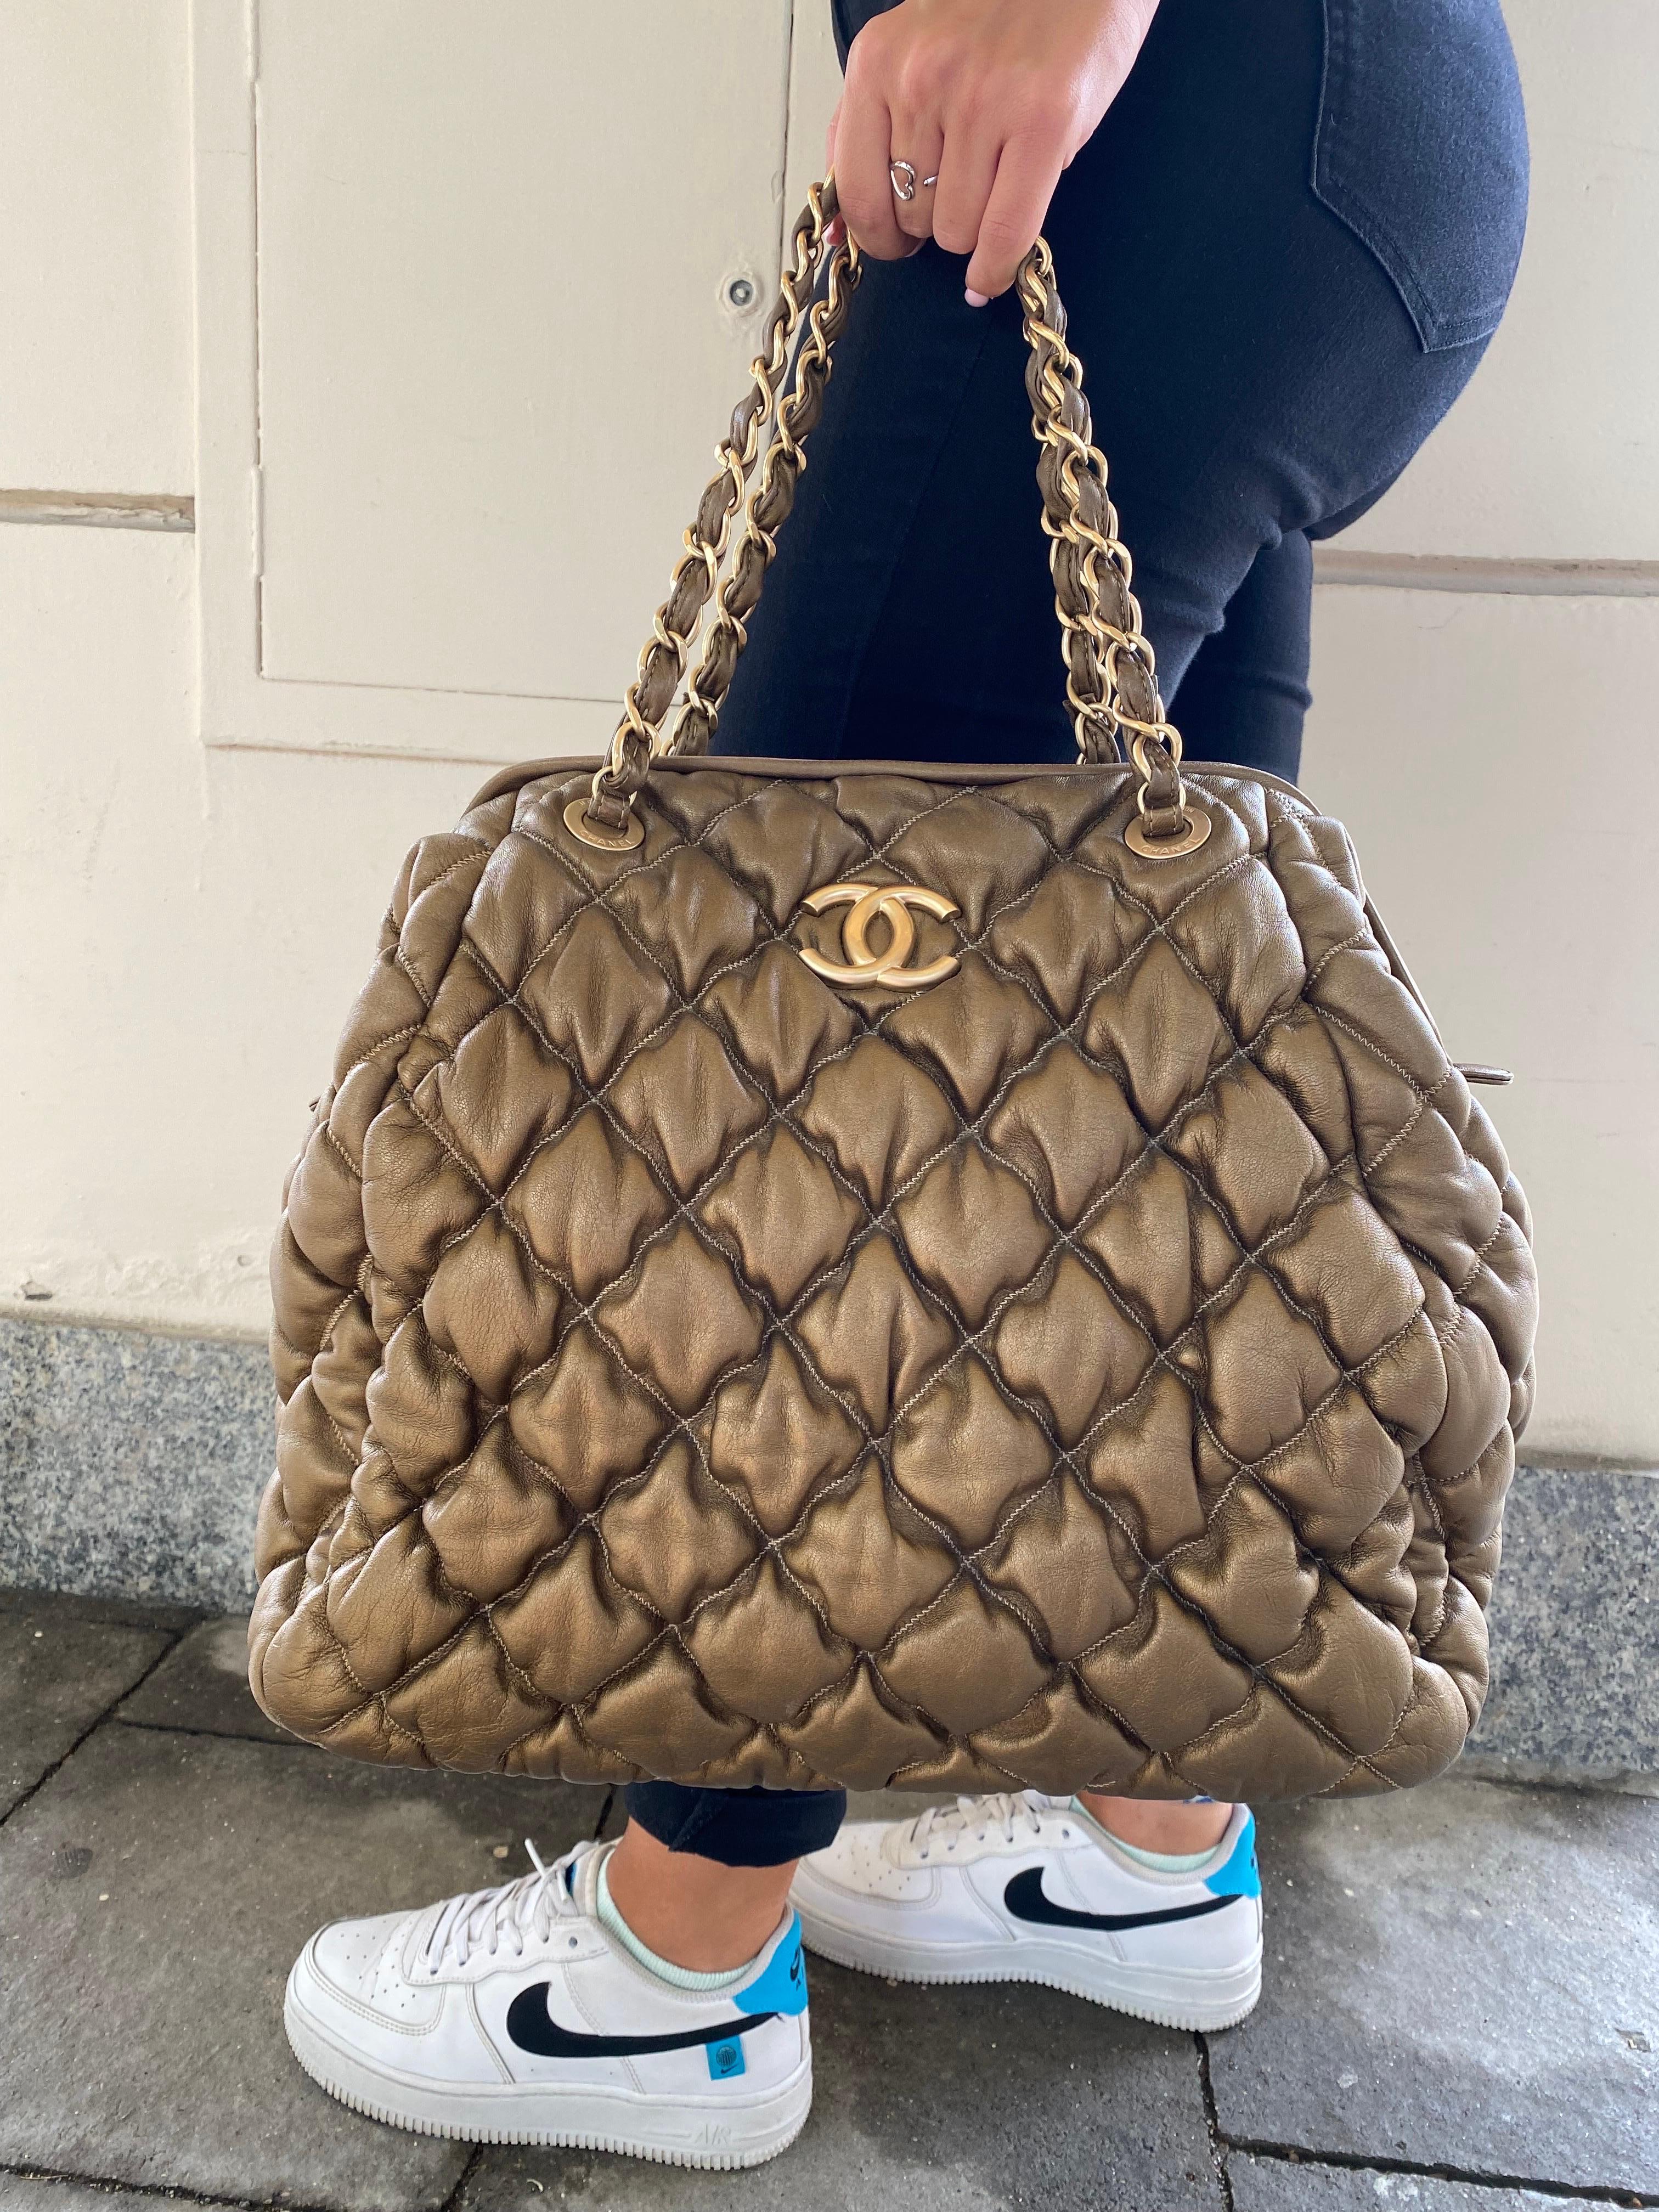 Chanel designer bag, Bolla model, made of quilted gold-colored leather with golden hardware.

Equipped with double leather handle and braided chain for carrying on the shoulder.

Equipped with a zip closure, internally lined with beige canvas, very